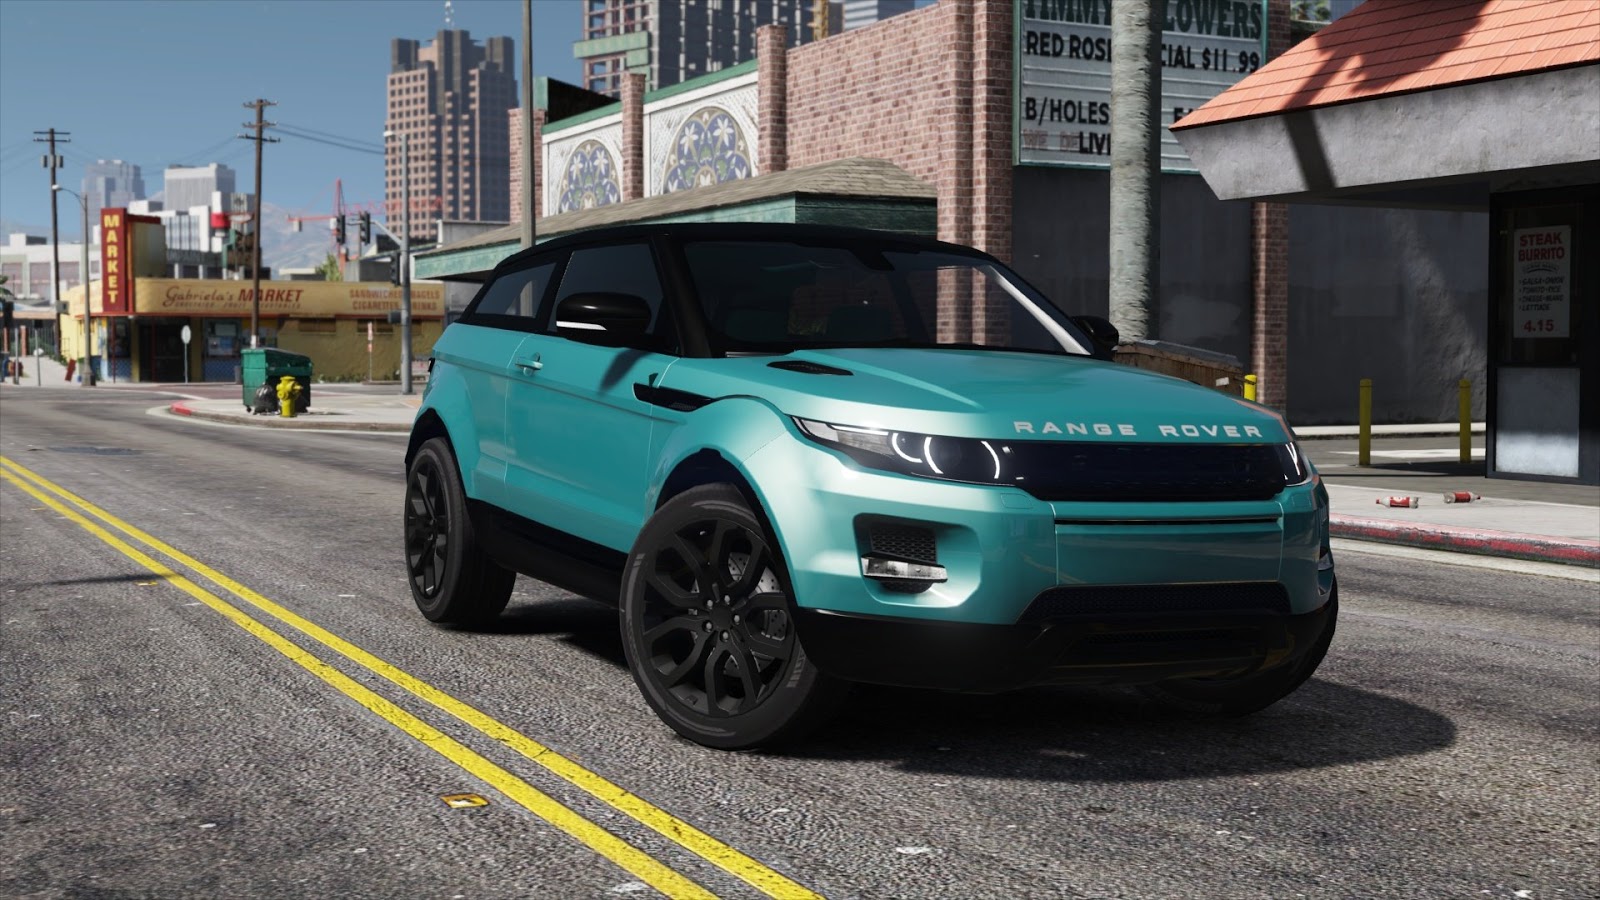 Land rover in gta 5 фото 93